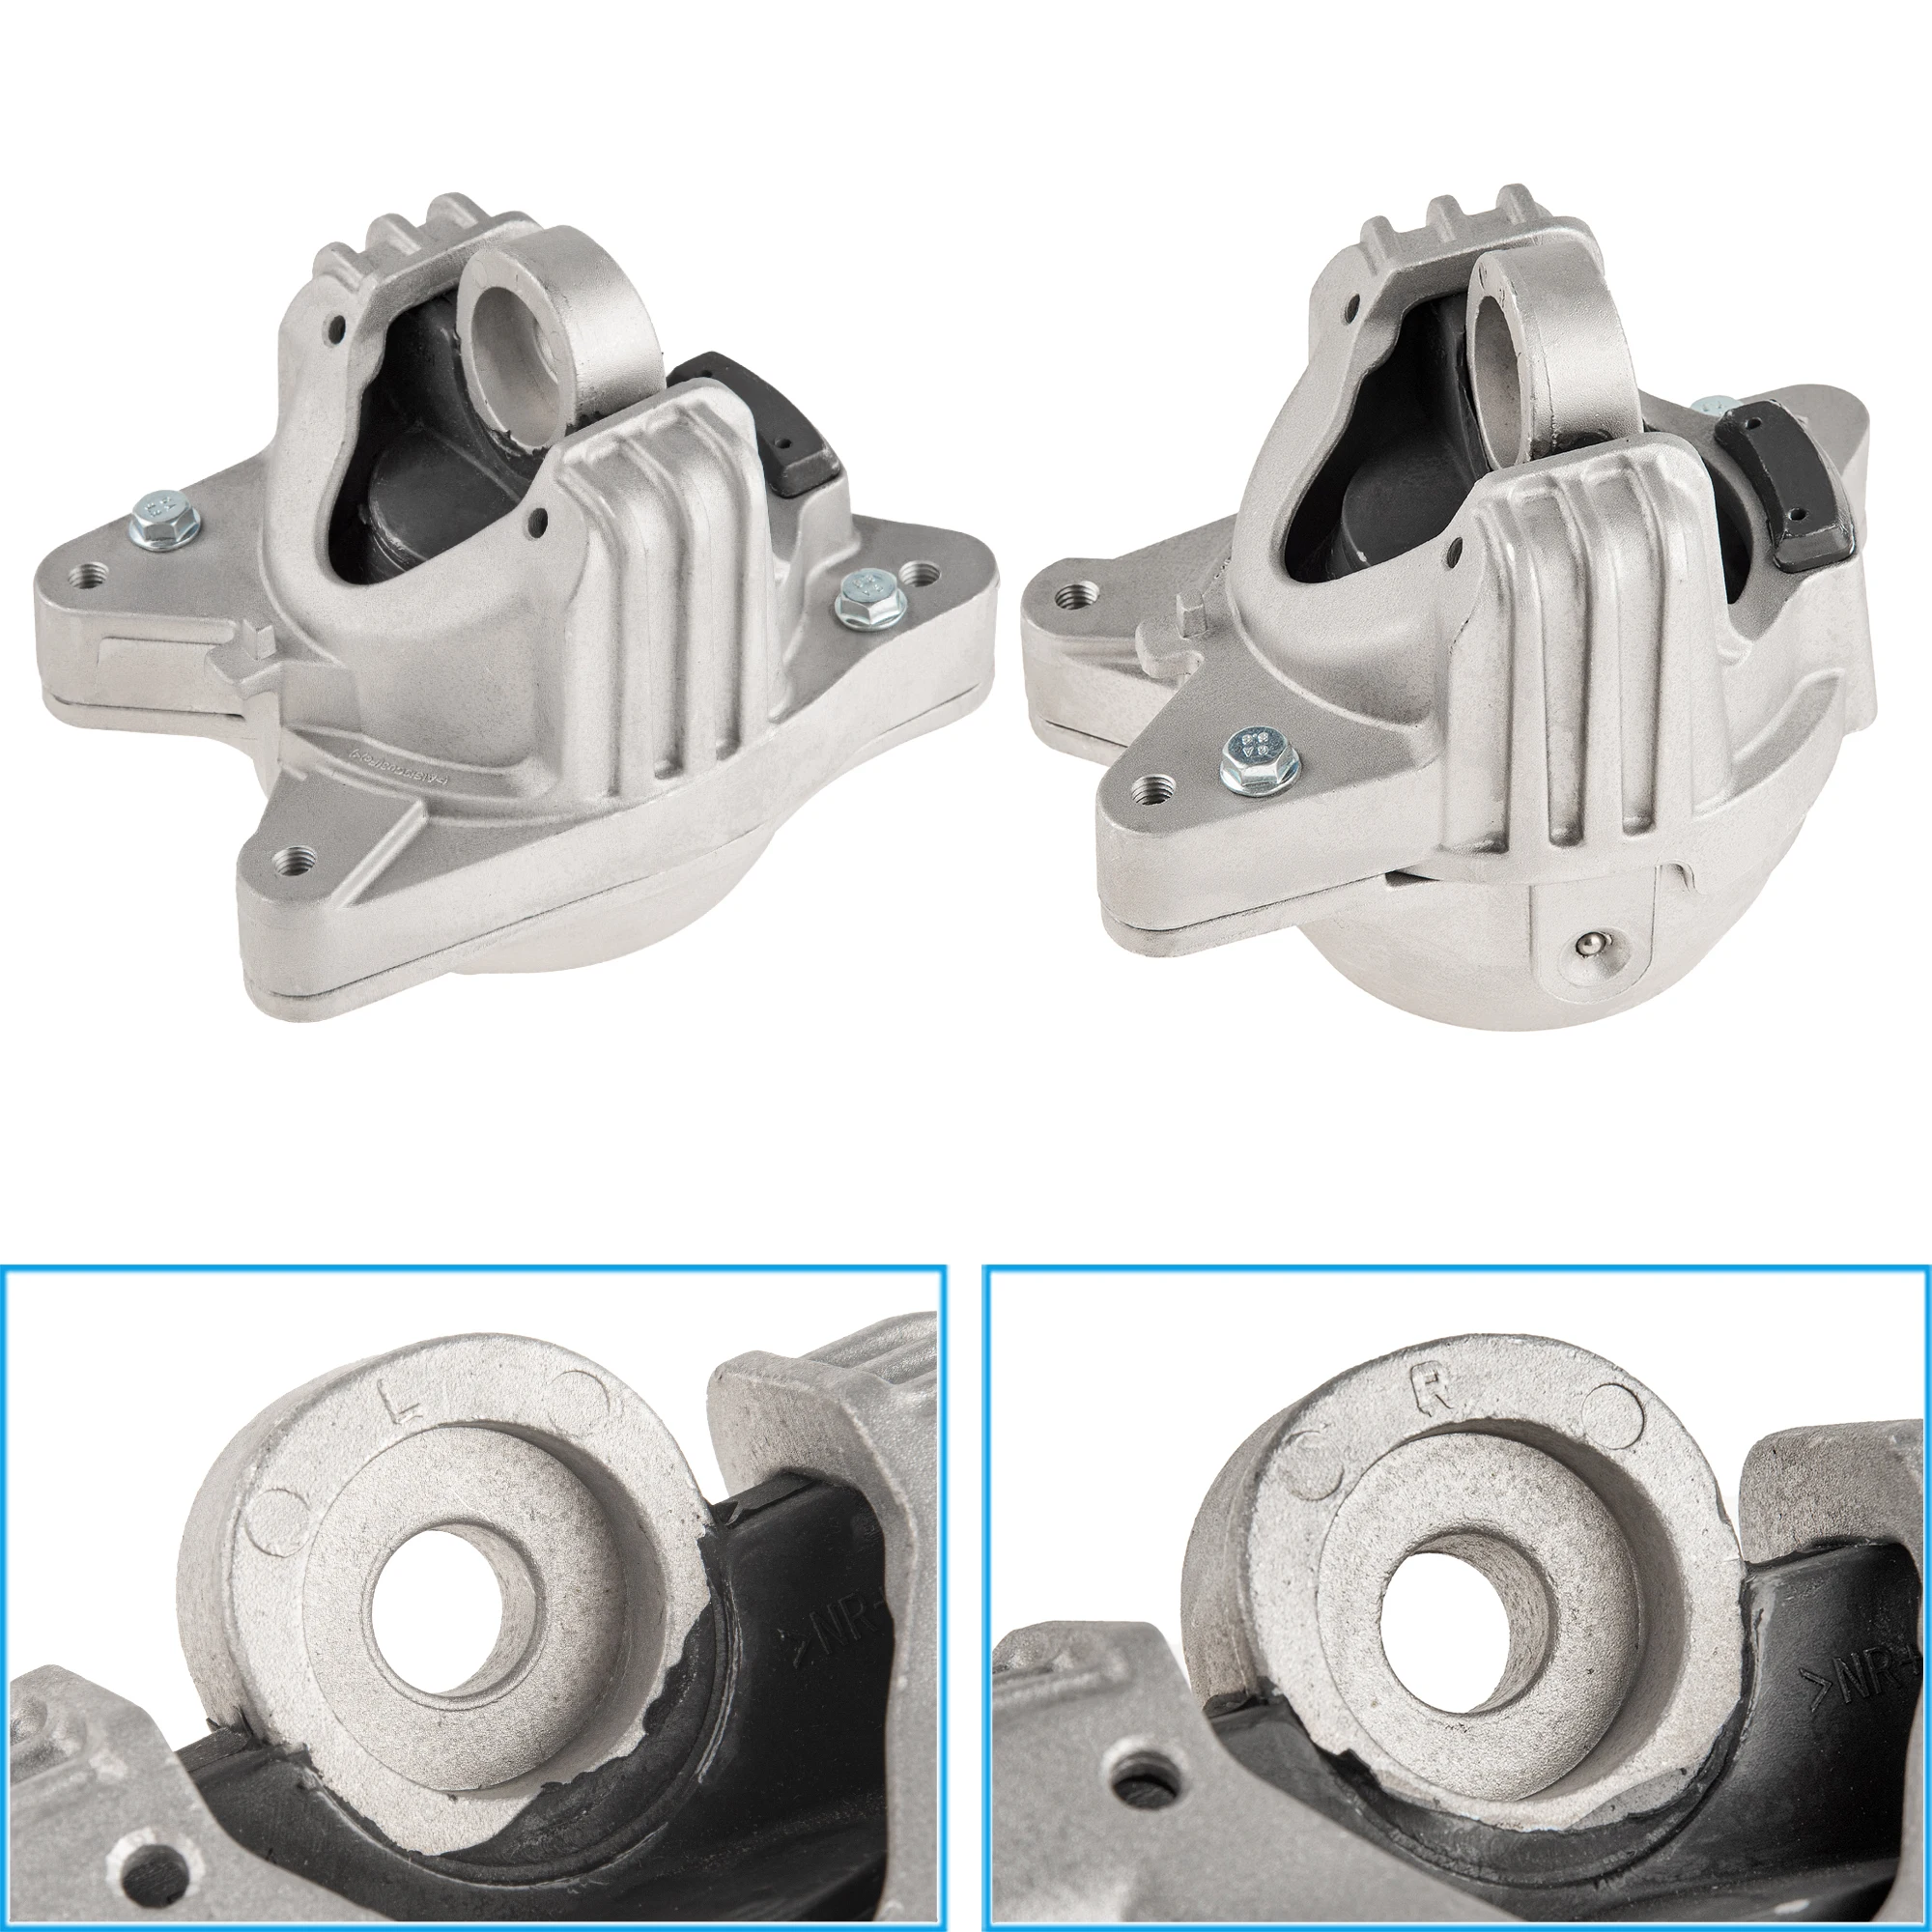 

Pair Of Left & Right Side Engine Mounts 94637505740 94637505840 For Porsche Macan 3.0L 3.6L 2015-2018